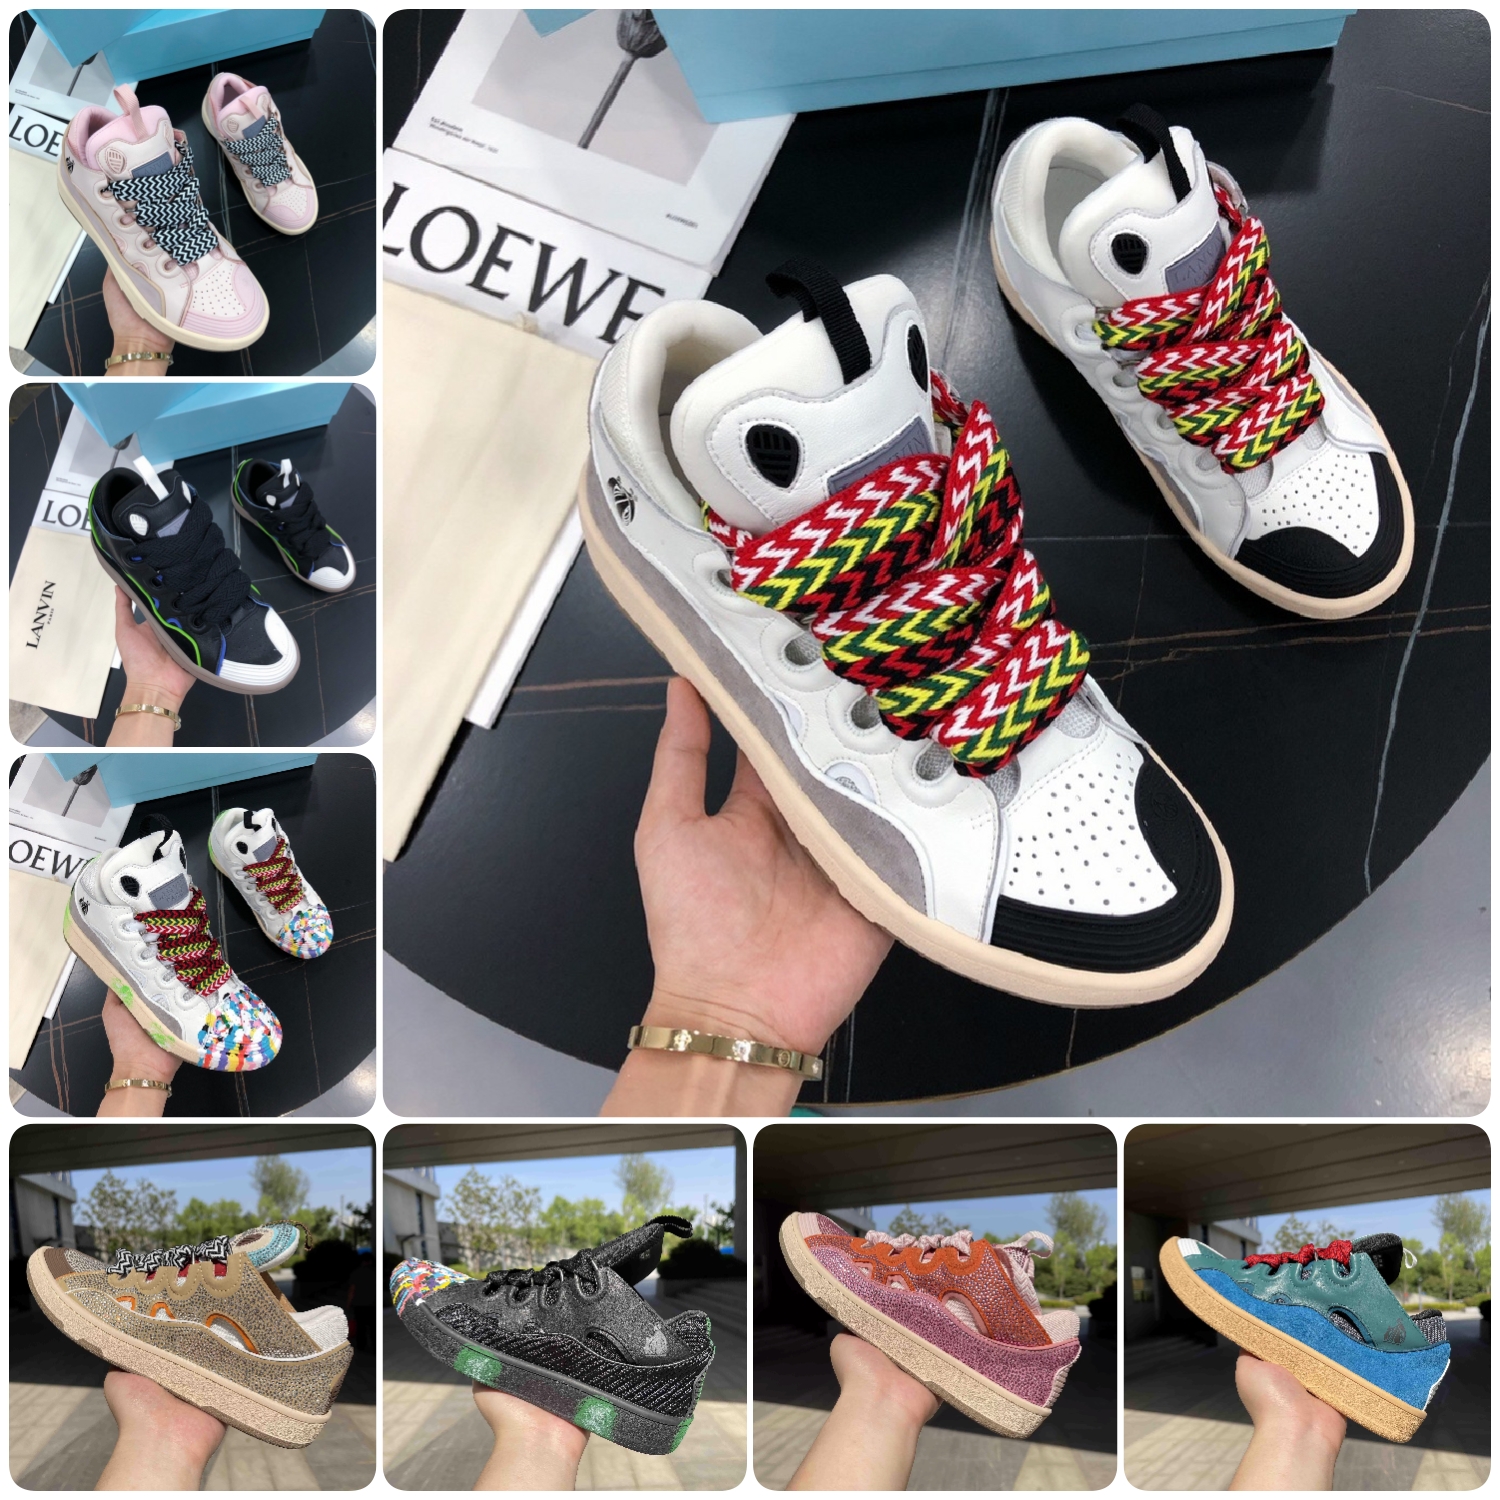 

Classic Curb sneakers Casual Shoes Men Women Multicolor Leather Sneaker Python Embroidered Lover Ace Sneakers Size 35-46, Contact us for more products pictures